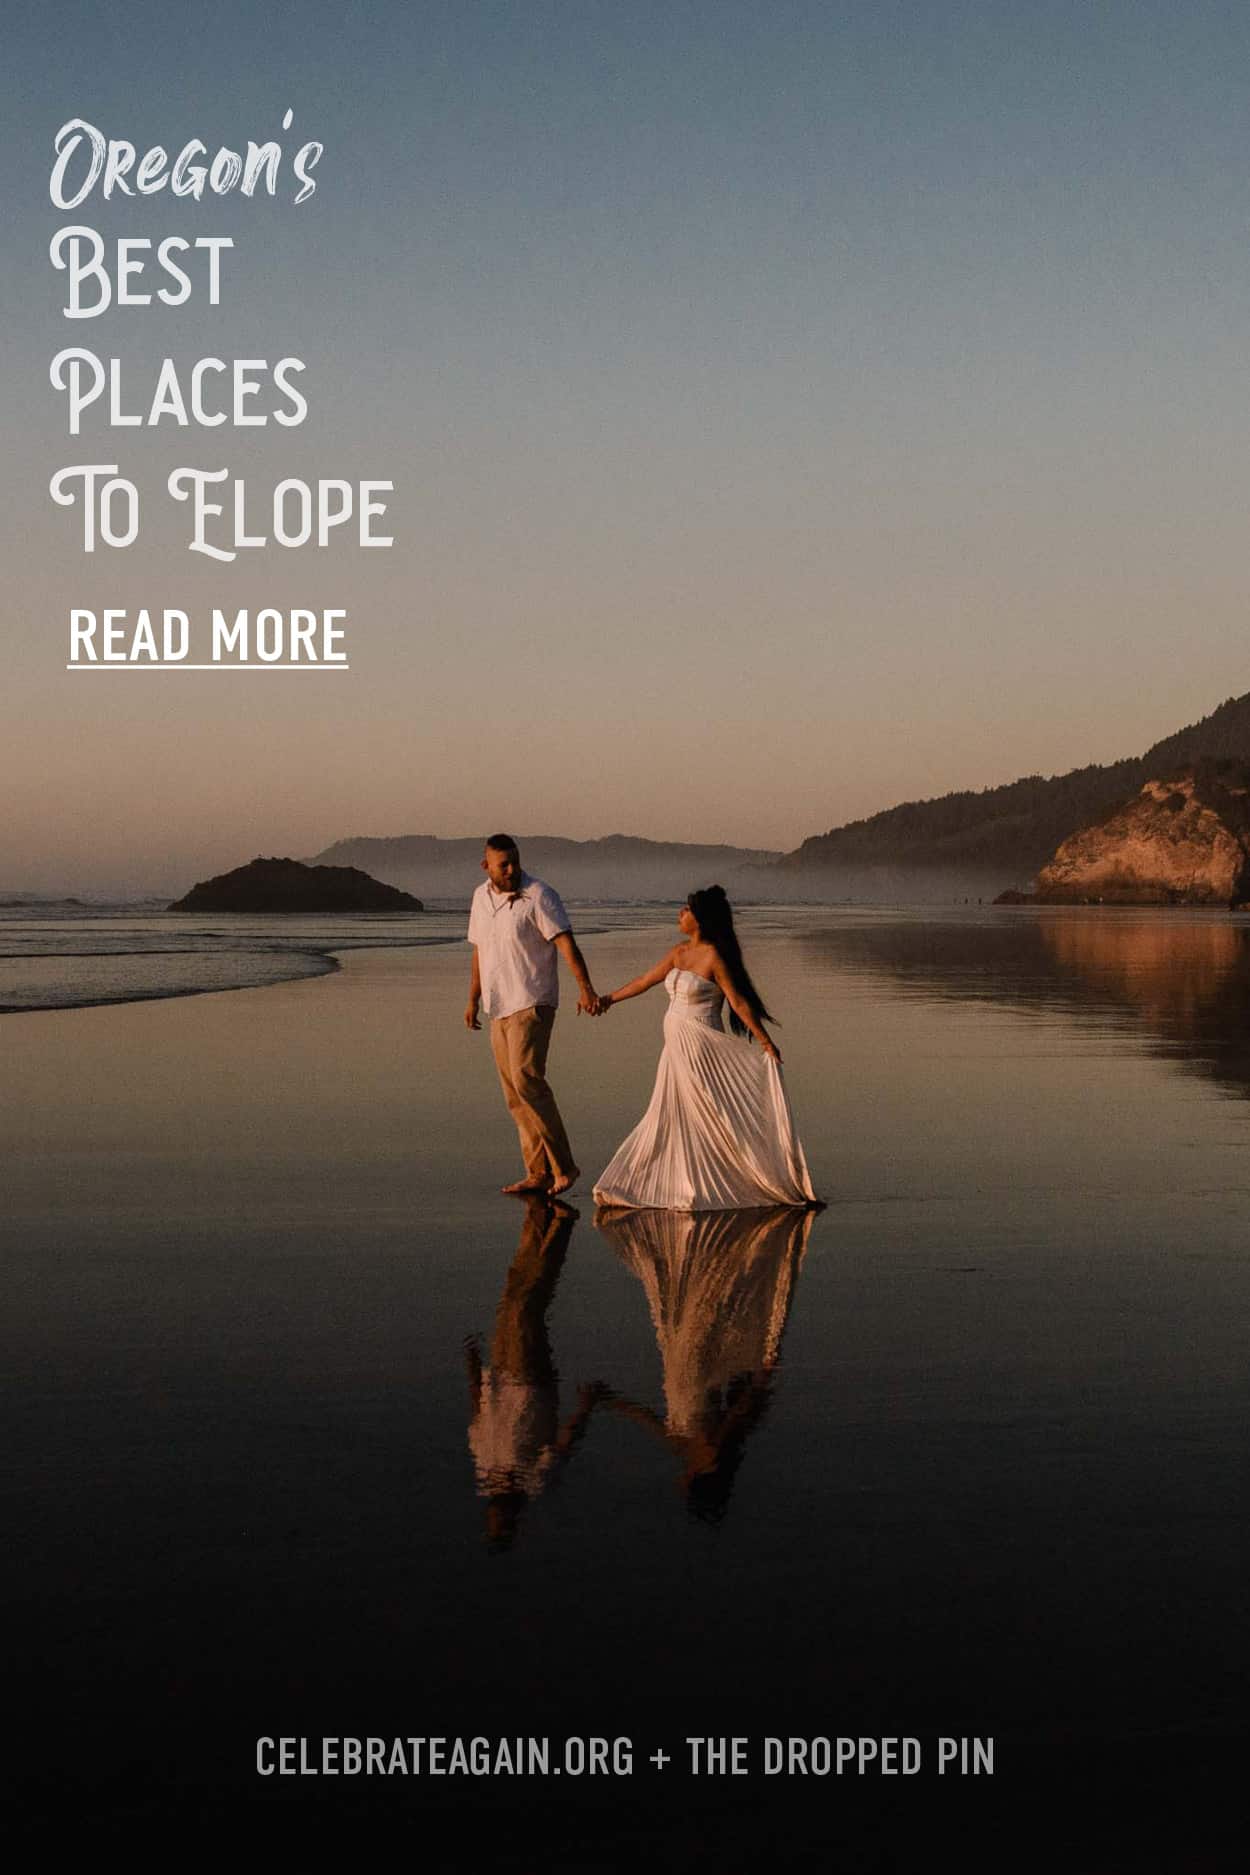 text "Oregon's best places to elope read more" Couple explores the coast after their elopement during sunset